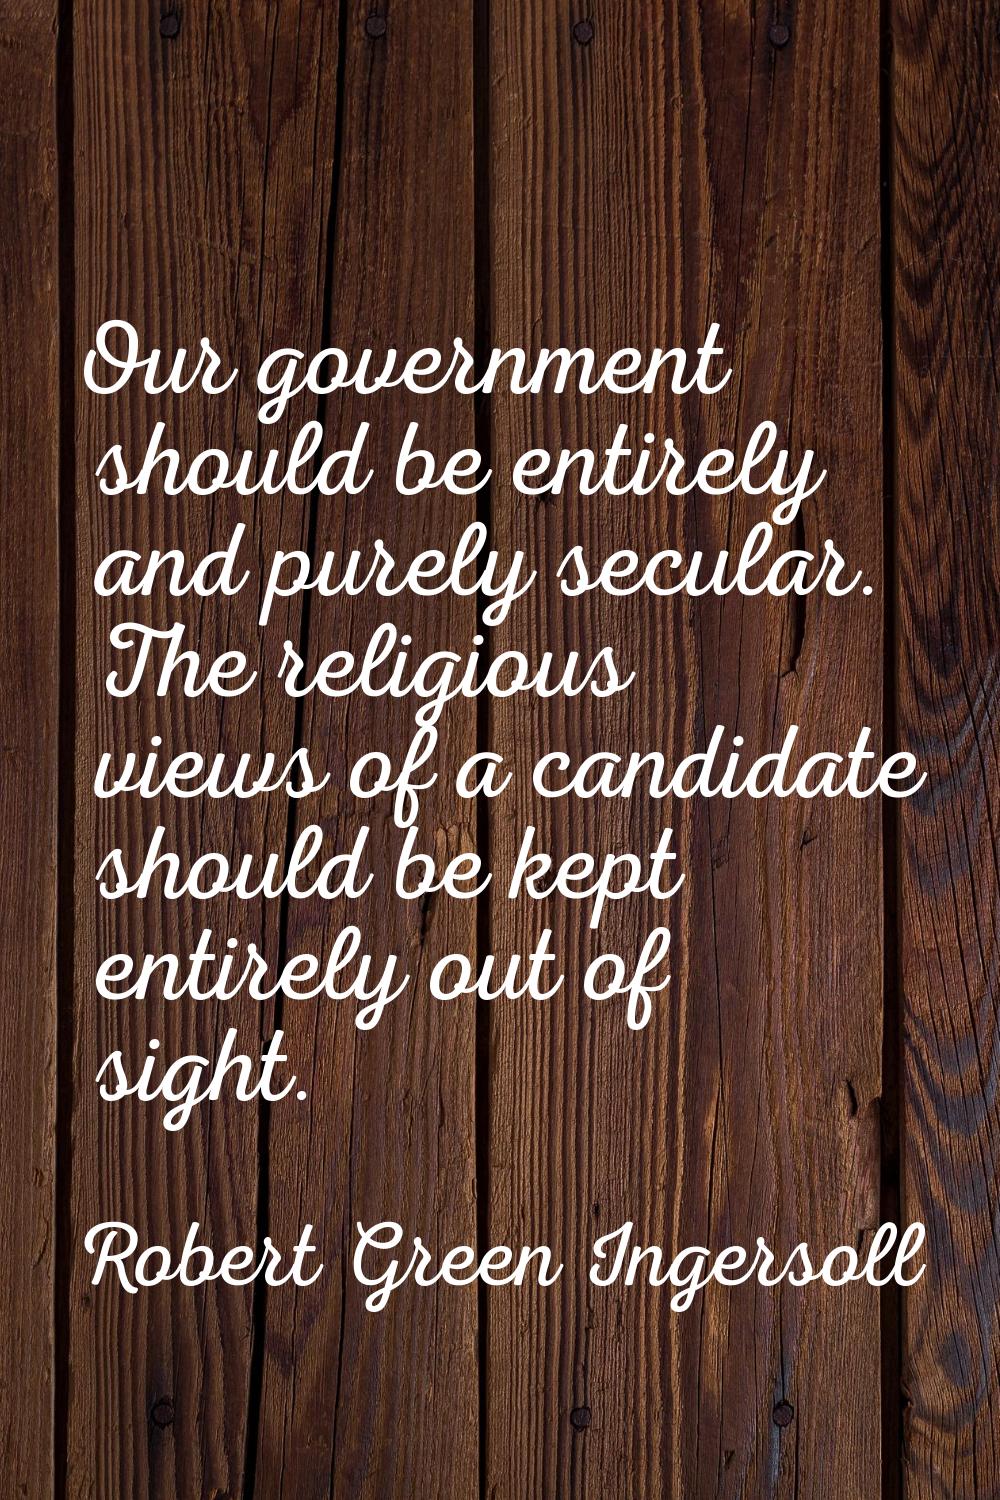 Our government should be entirely and purely secular. The religious views of a candidate should be 